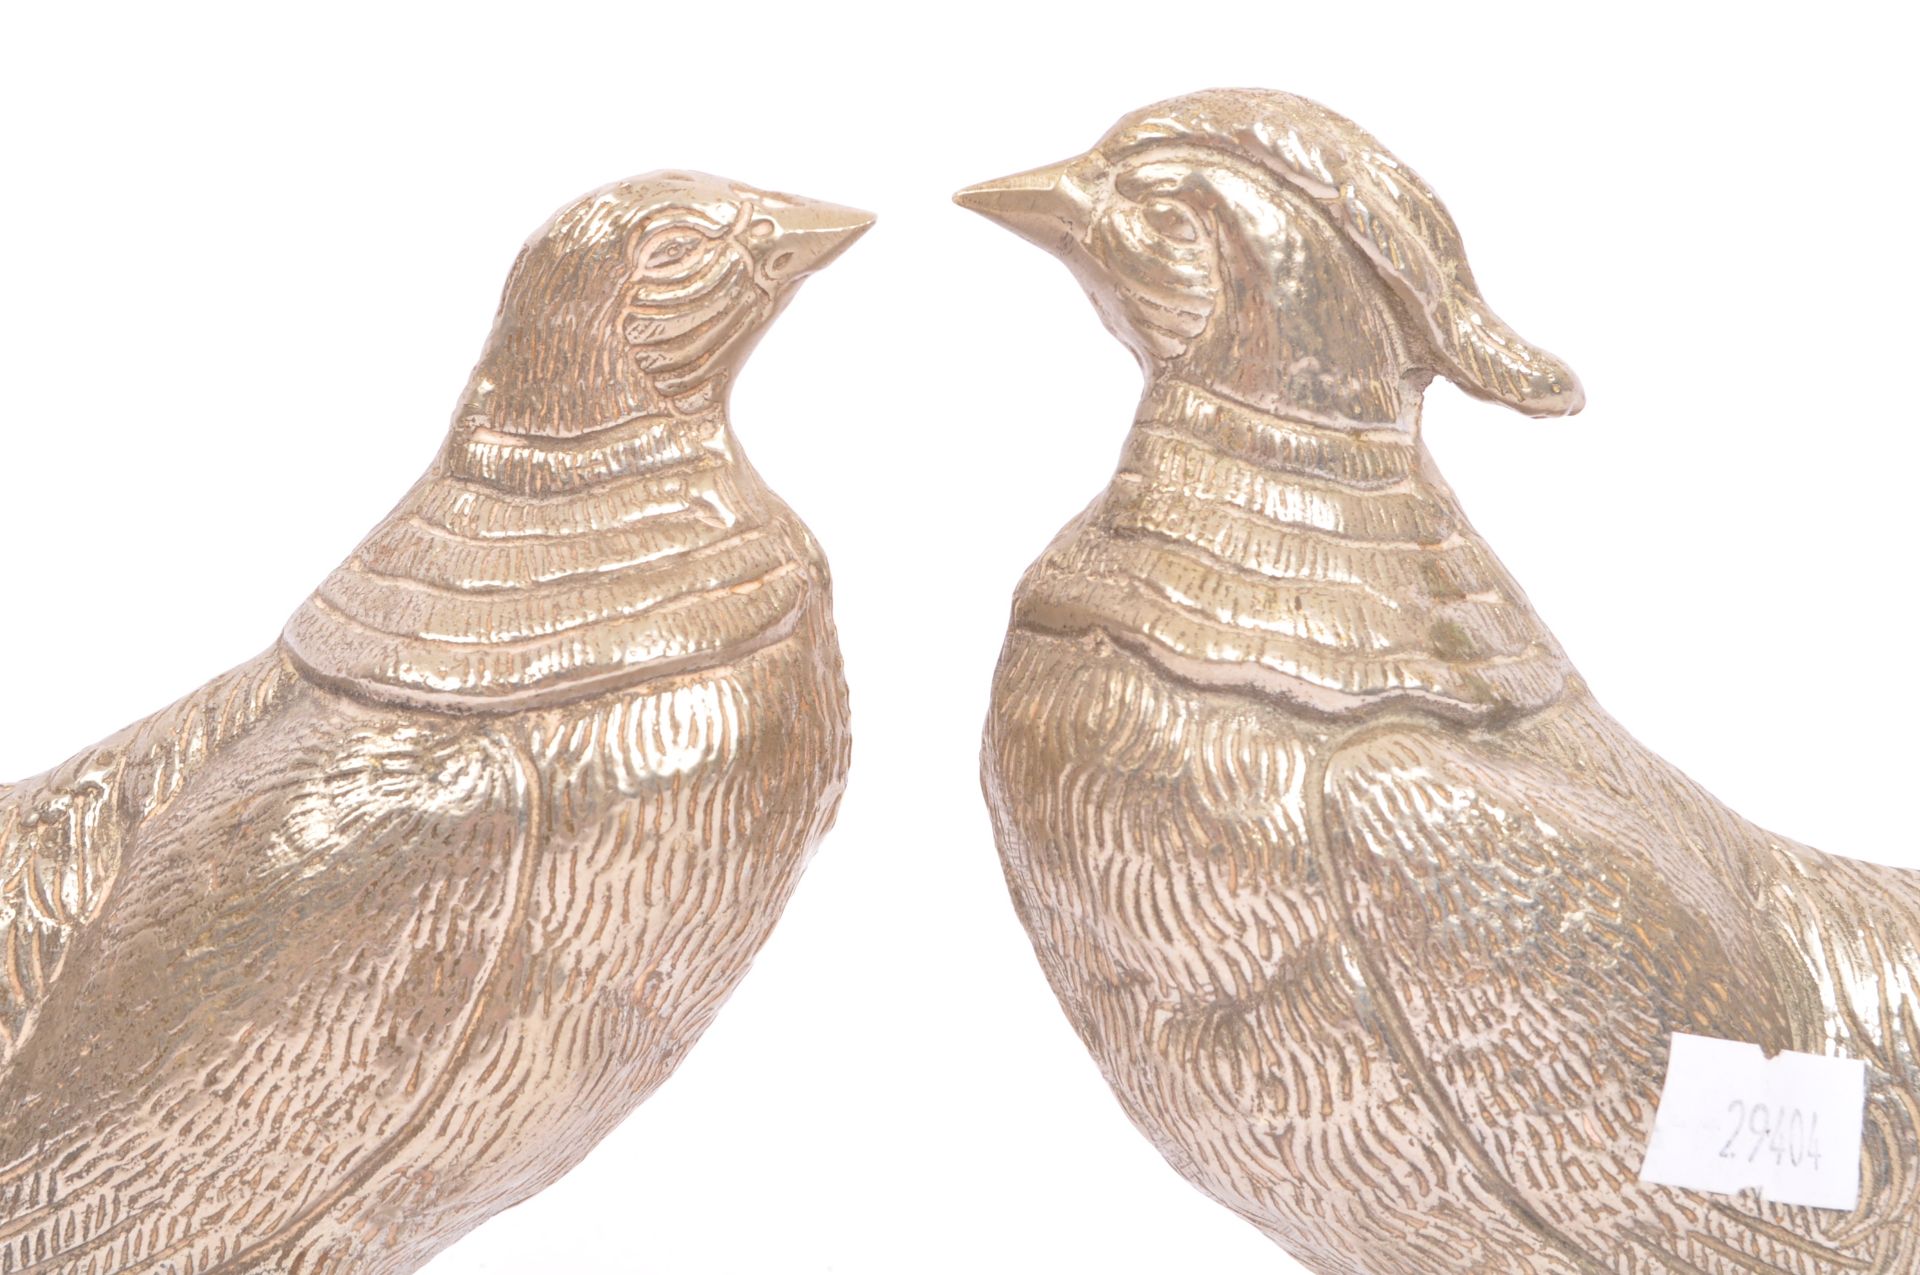 COLLECTION OF VINTAGE 20TH CENTURY METAL BIRD ORNAMENTS - Image 6 of 8